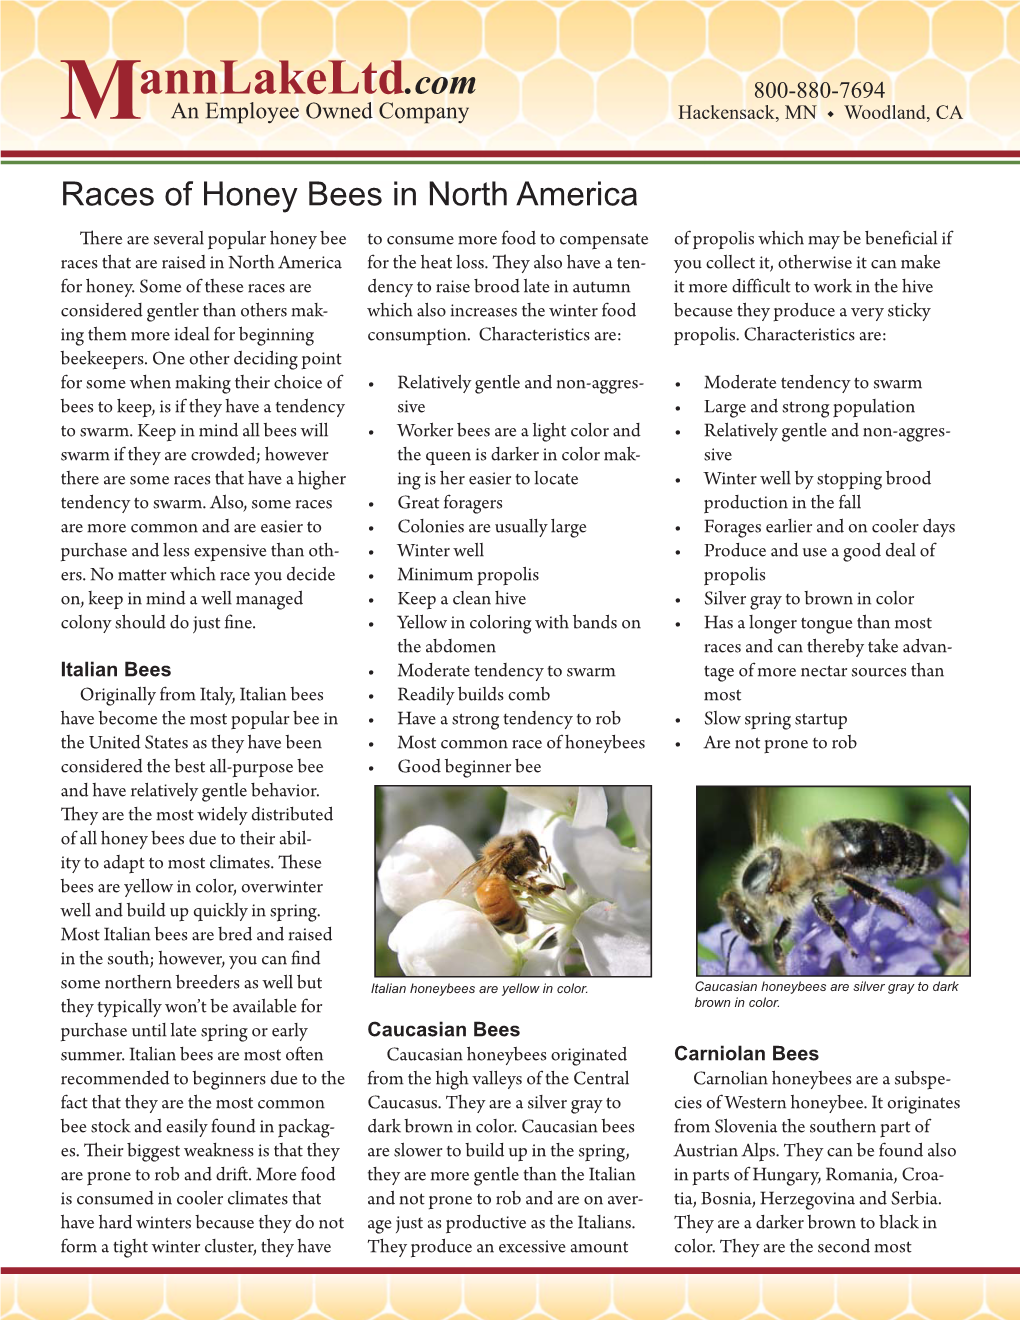 Races of Honey Bees in North America